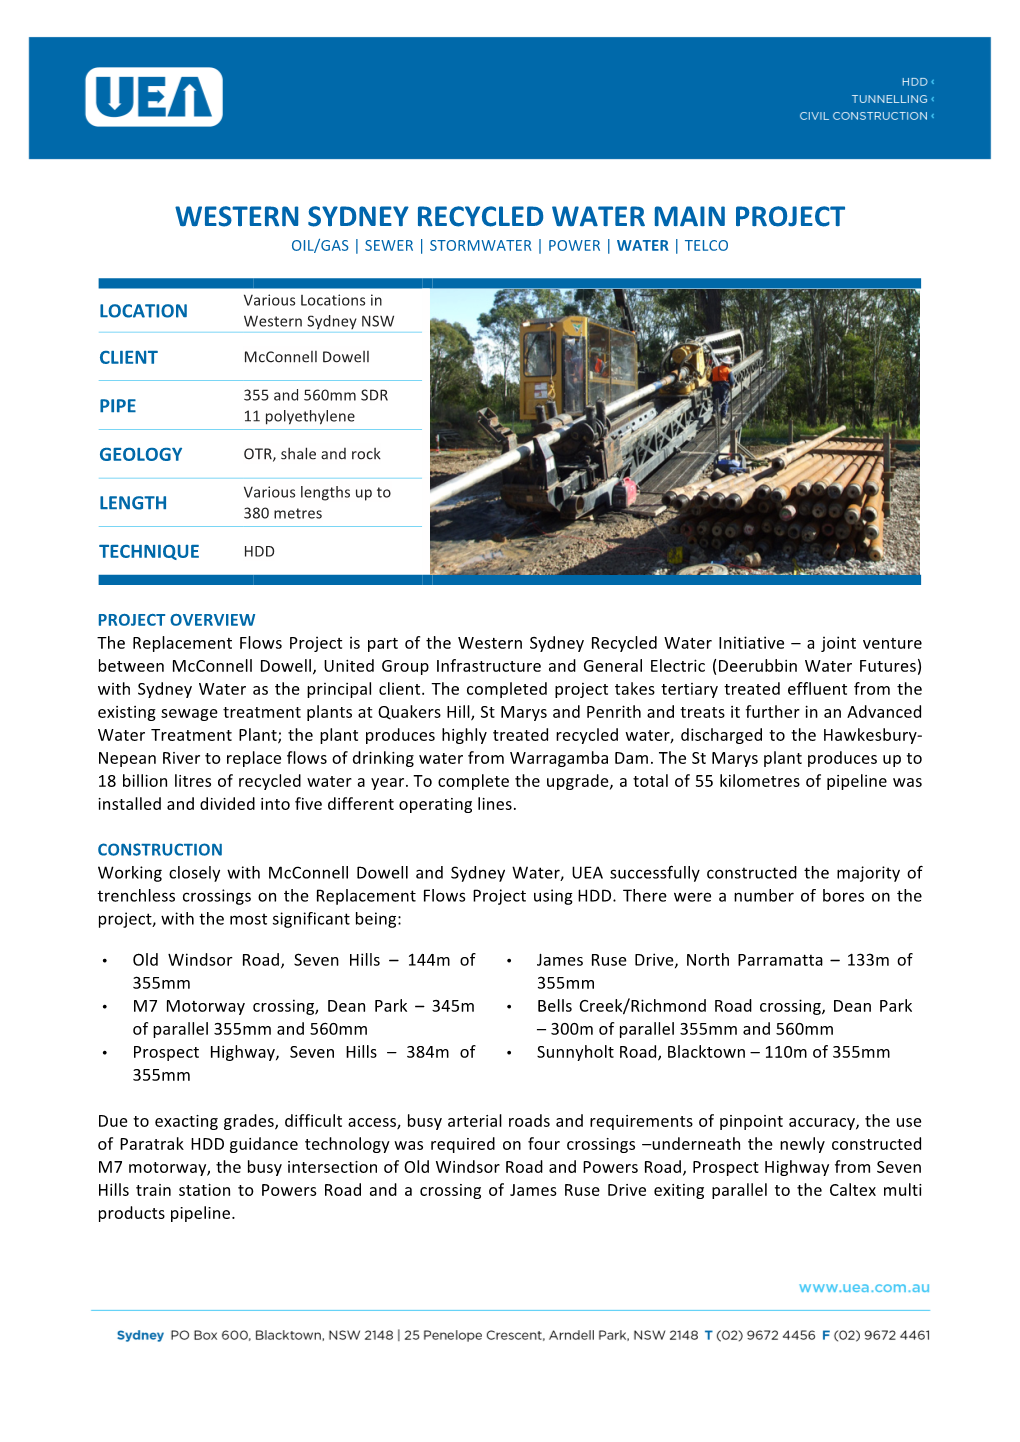 Western Sydney Recycled Water Main Project Oil/Gas | Sewer | Stormwater | Power | Water | Telco